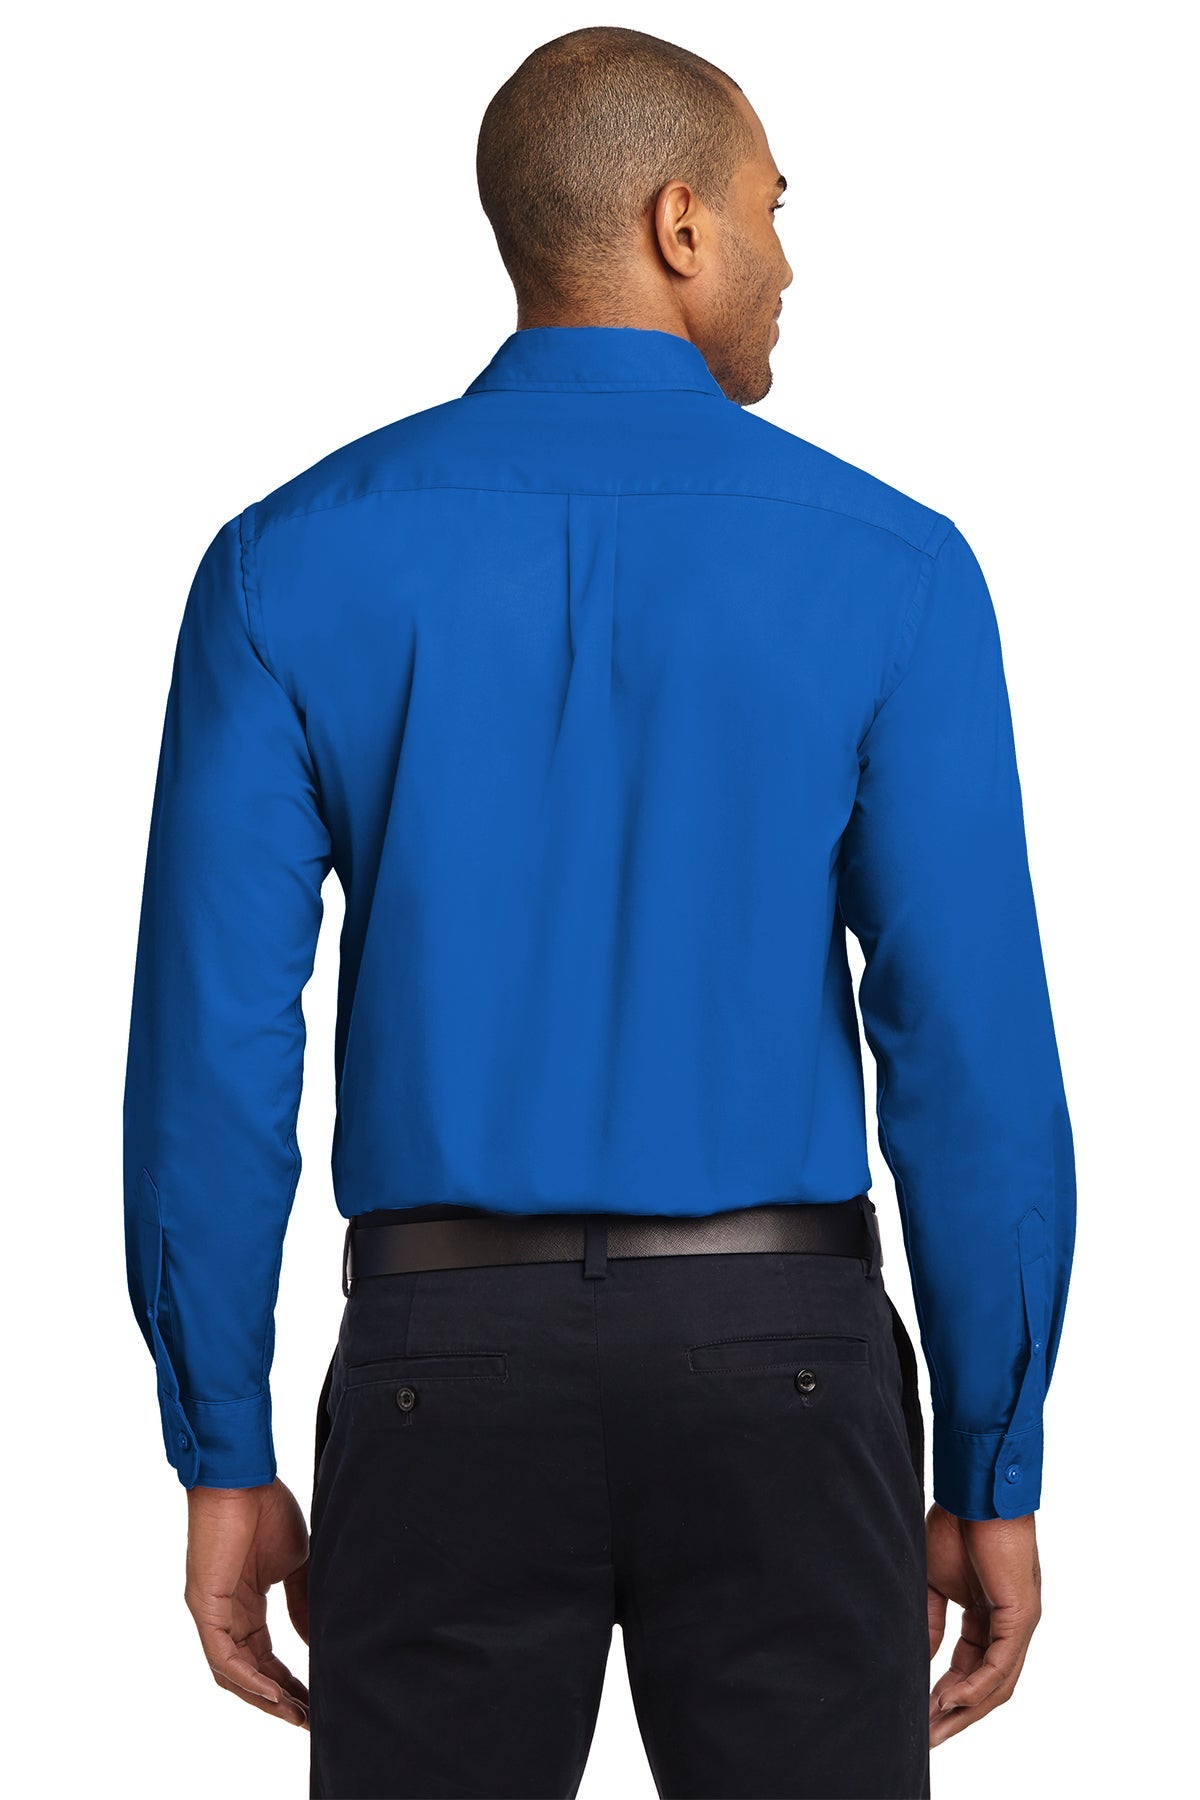 port authority_s608 _strong blue_company_logo_button downs